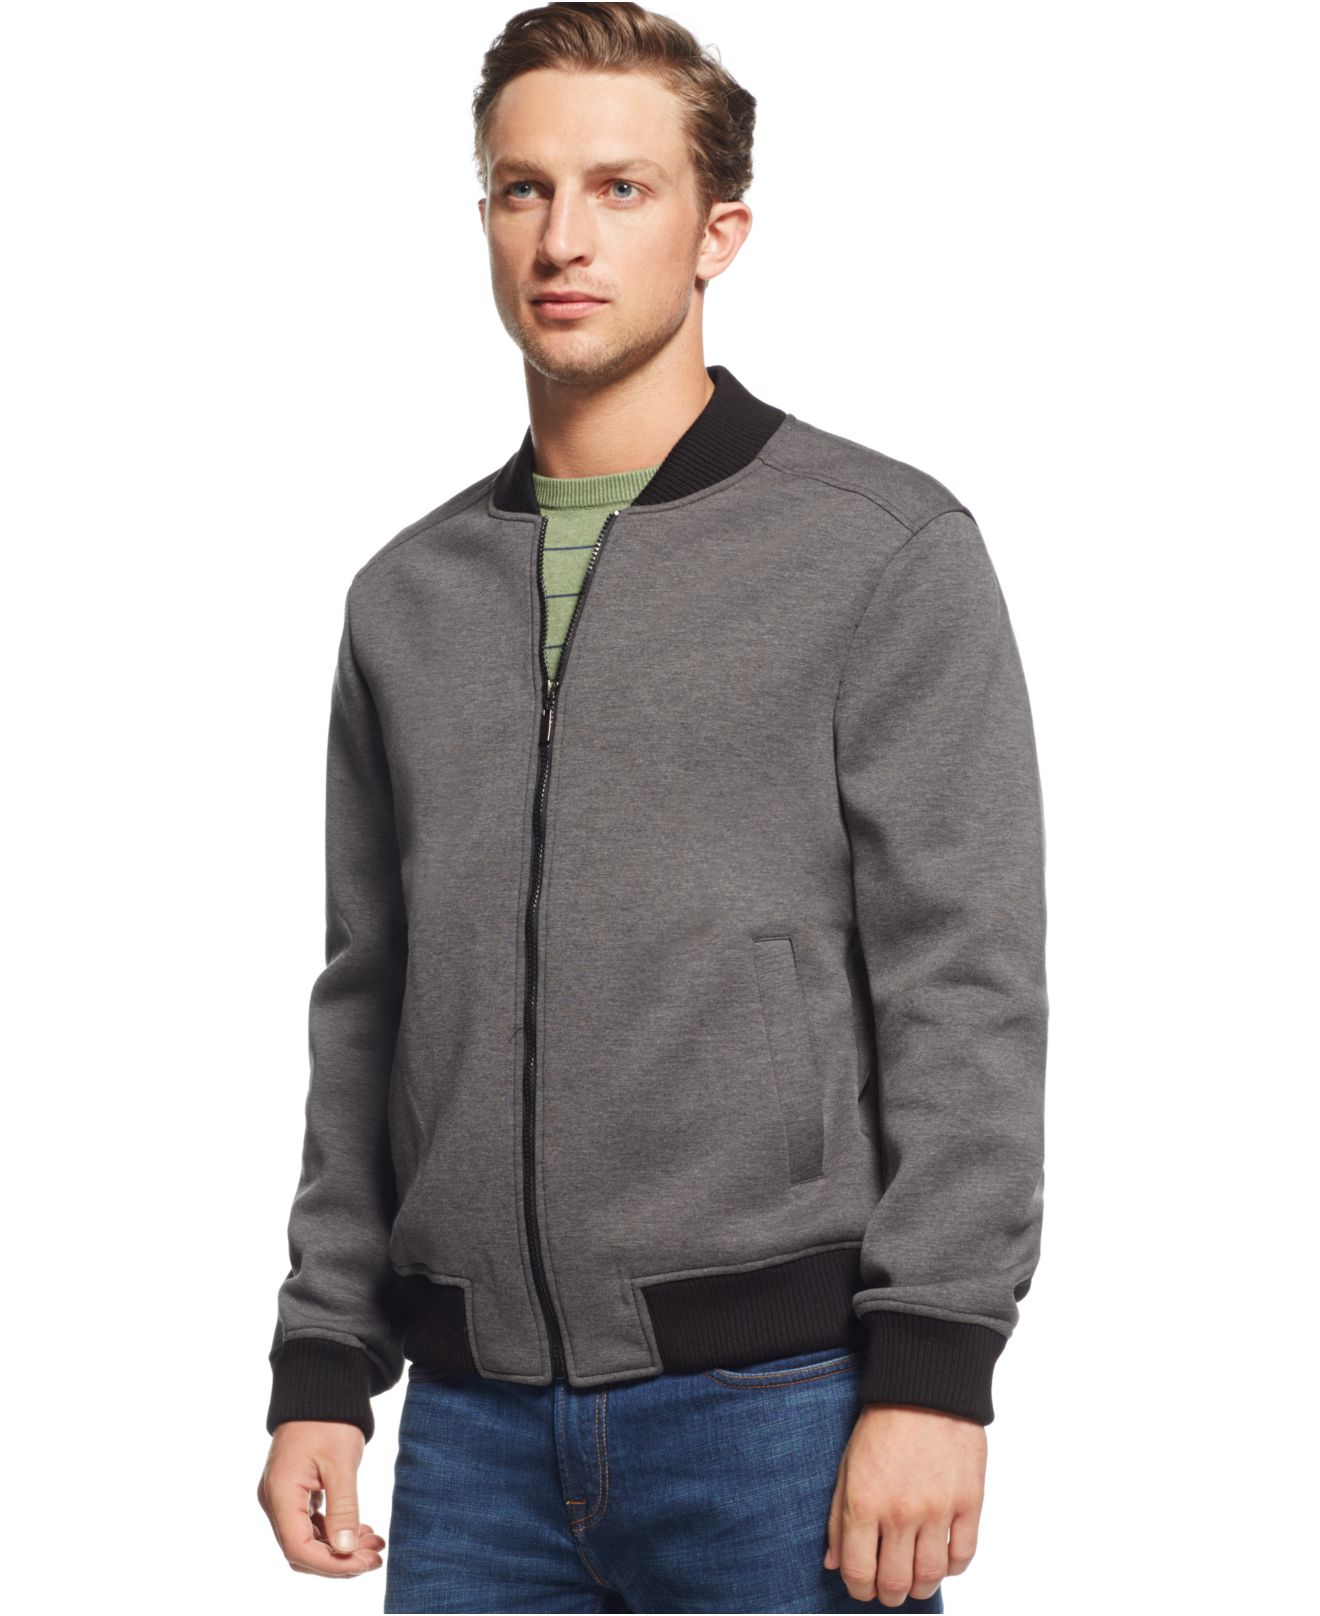 American rag Heathered Bomber Jacket in Gray for Men (Charcoal Heather ...